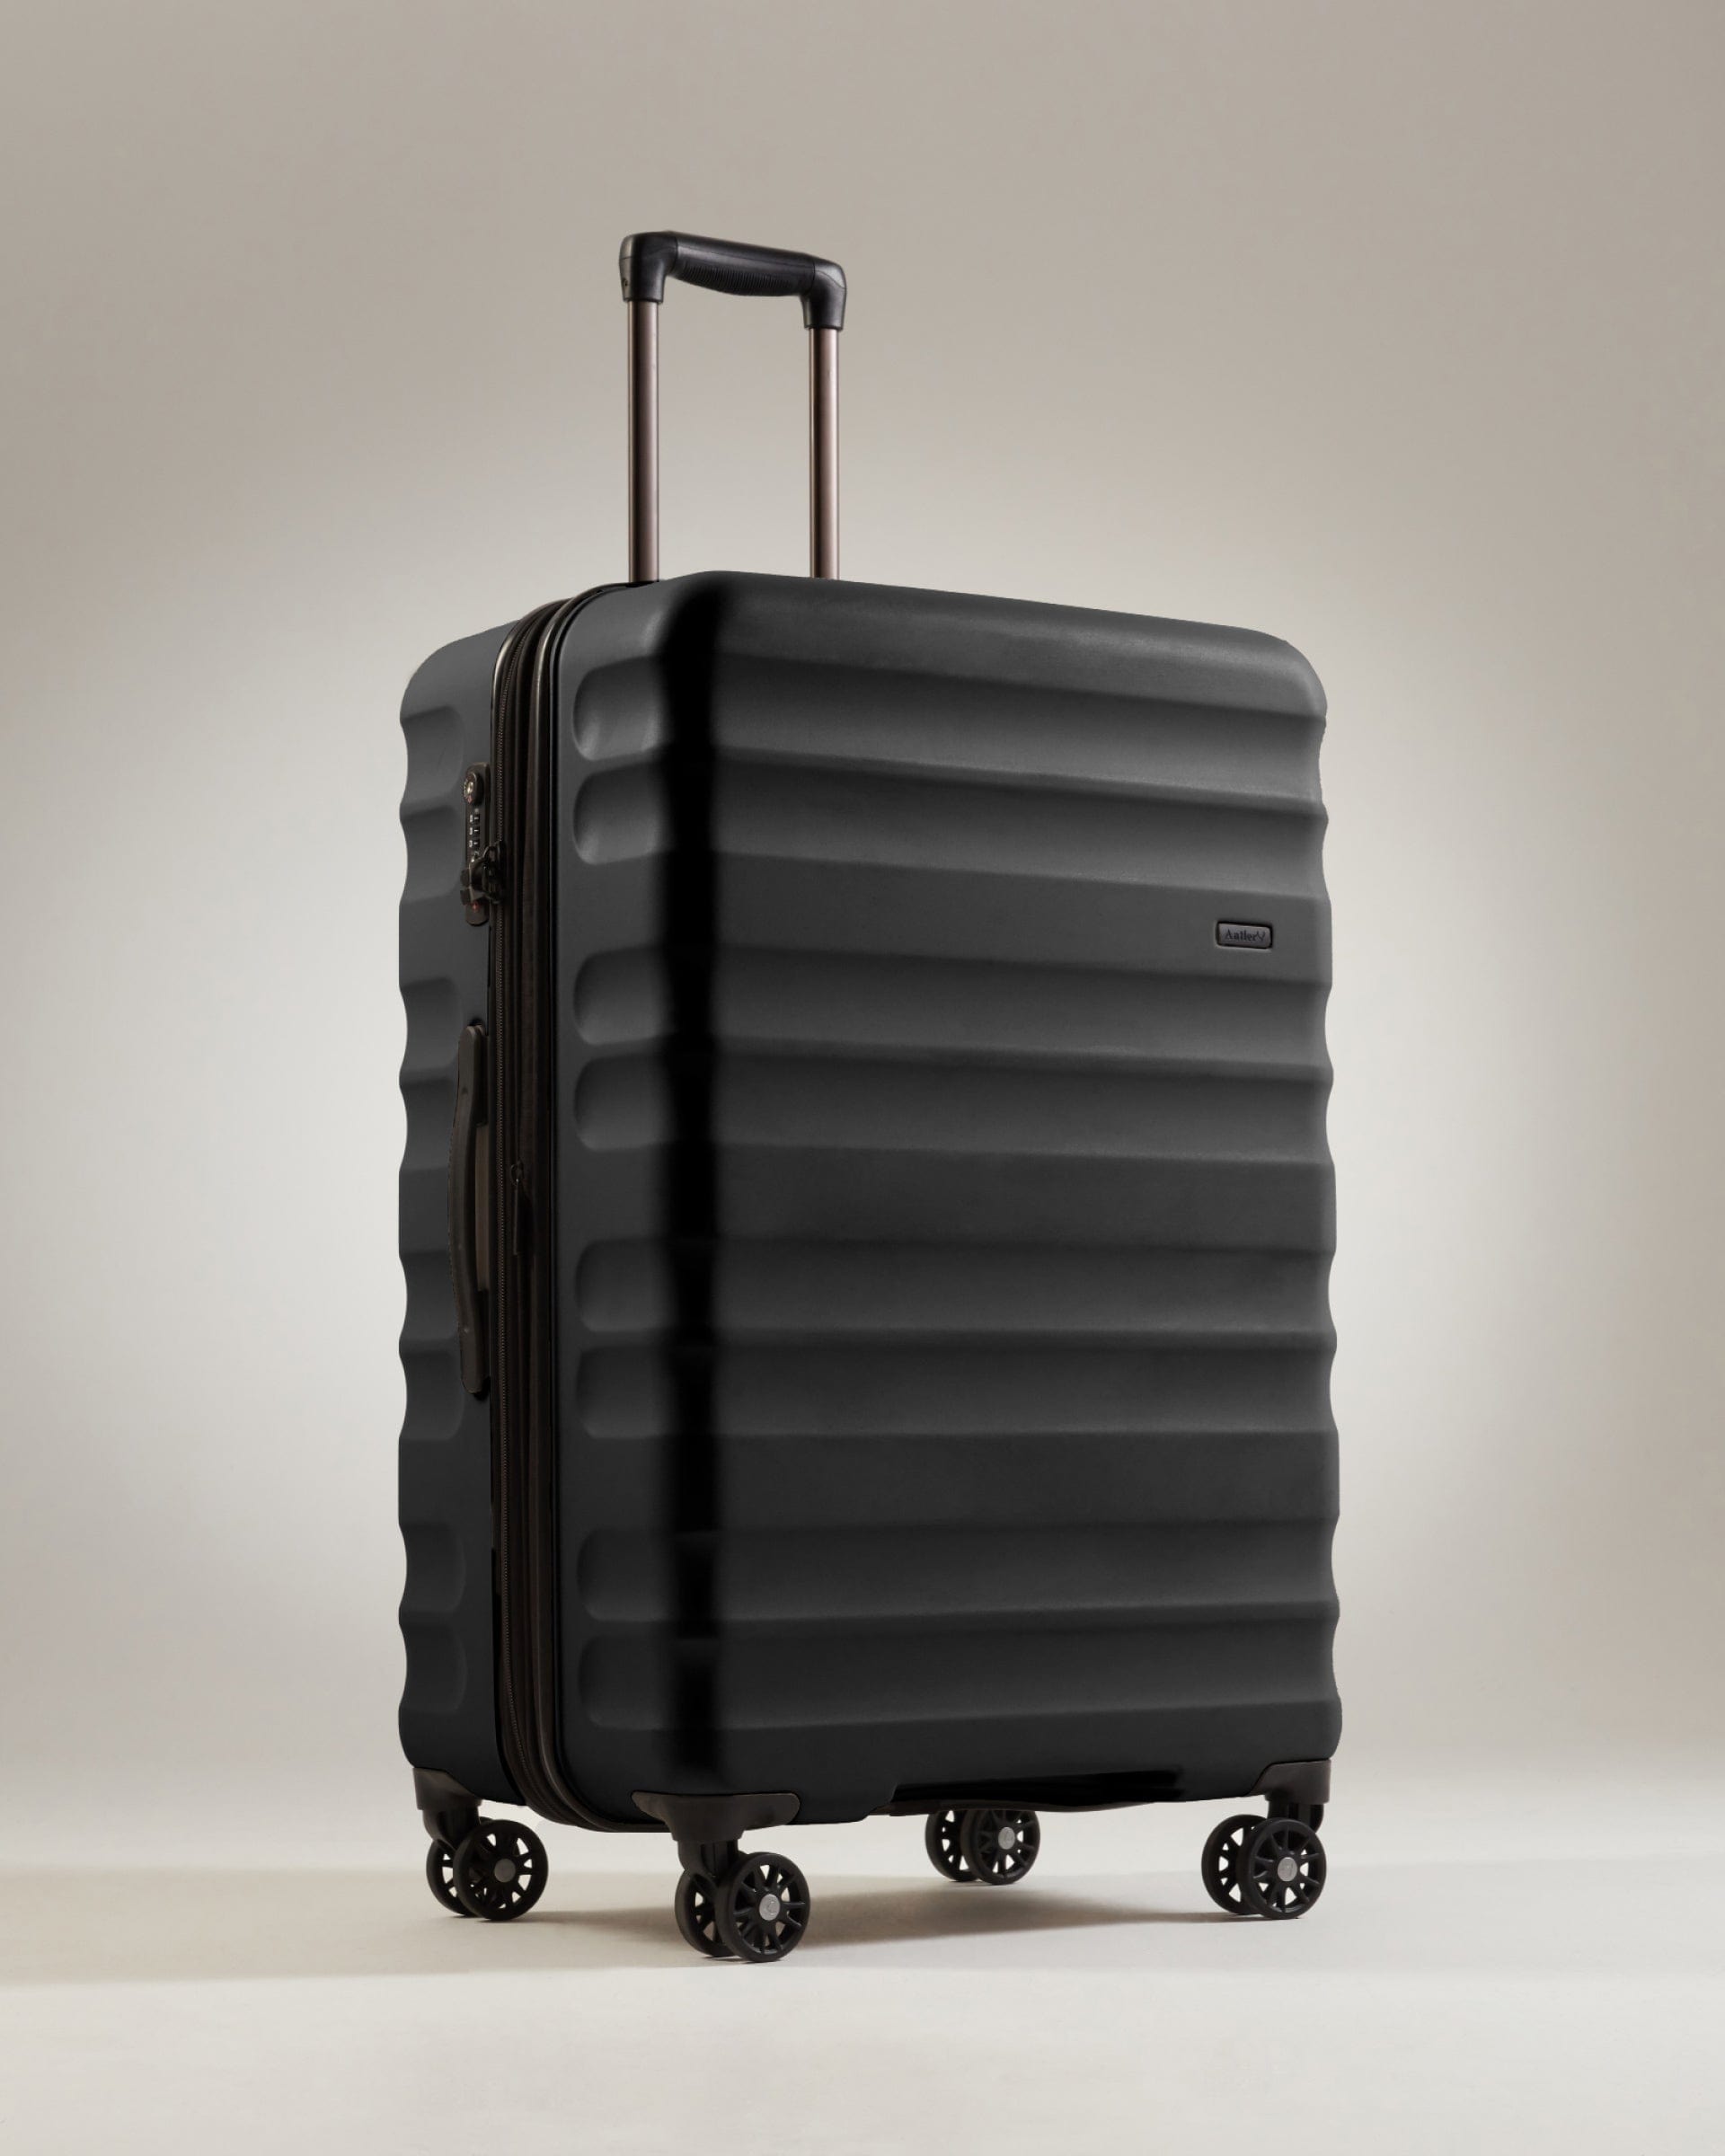 View Antler Clifton Large Suitcase In Black Size 35 x 52 x 80 cm information